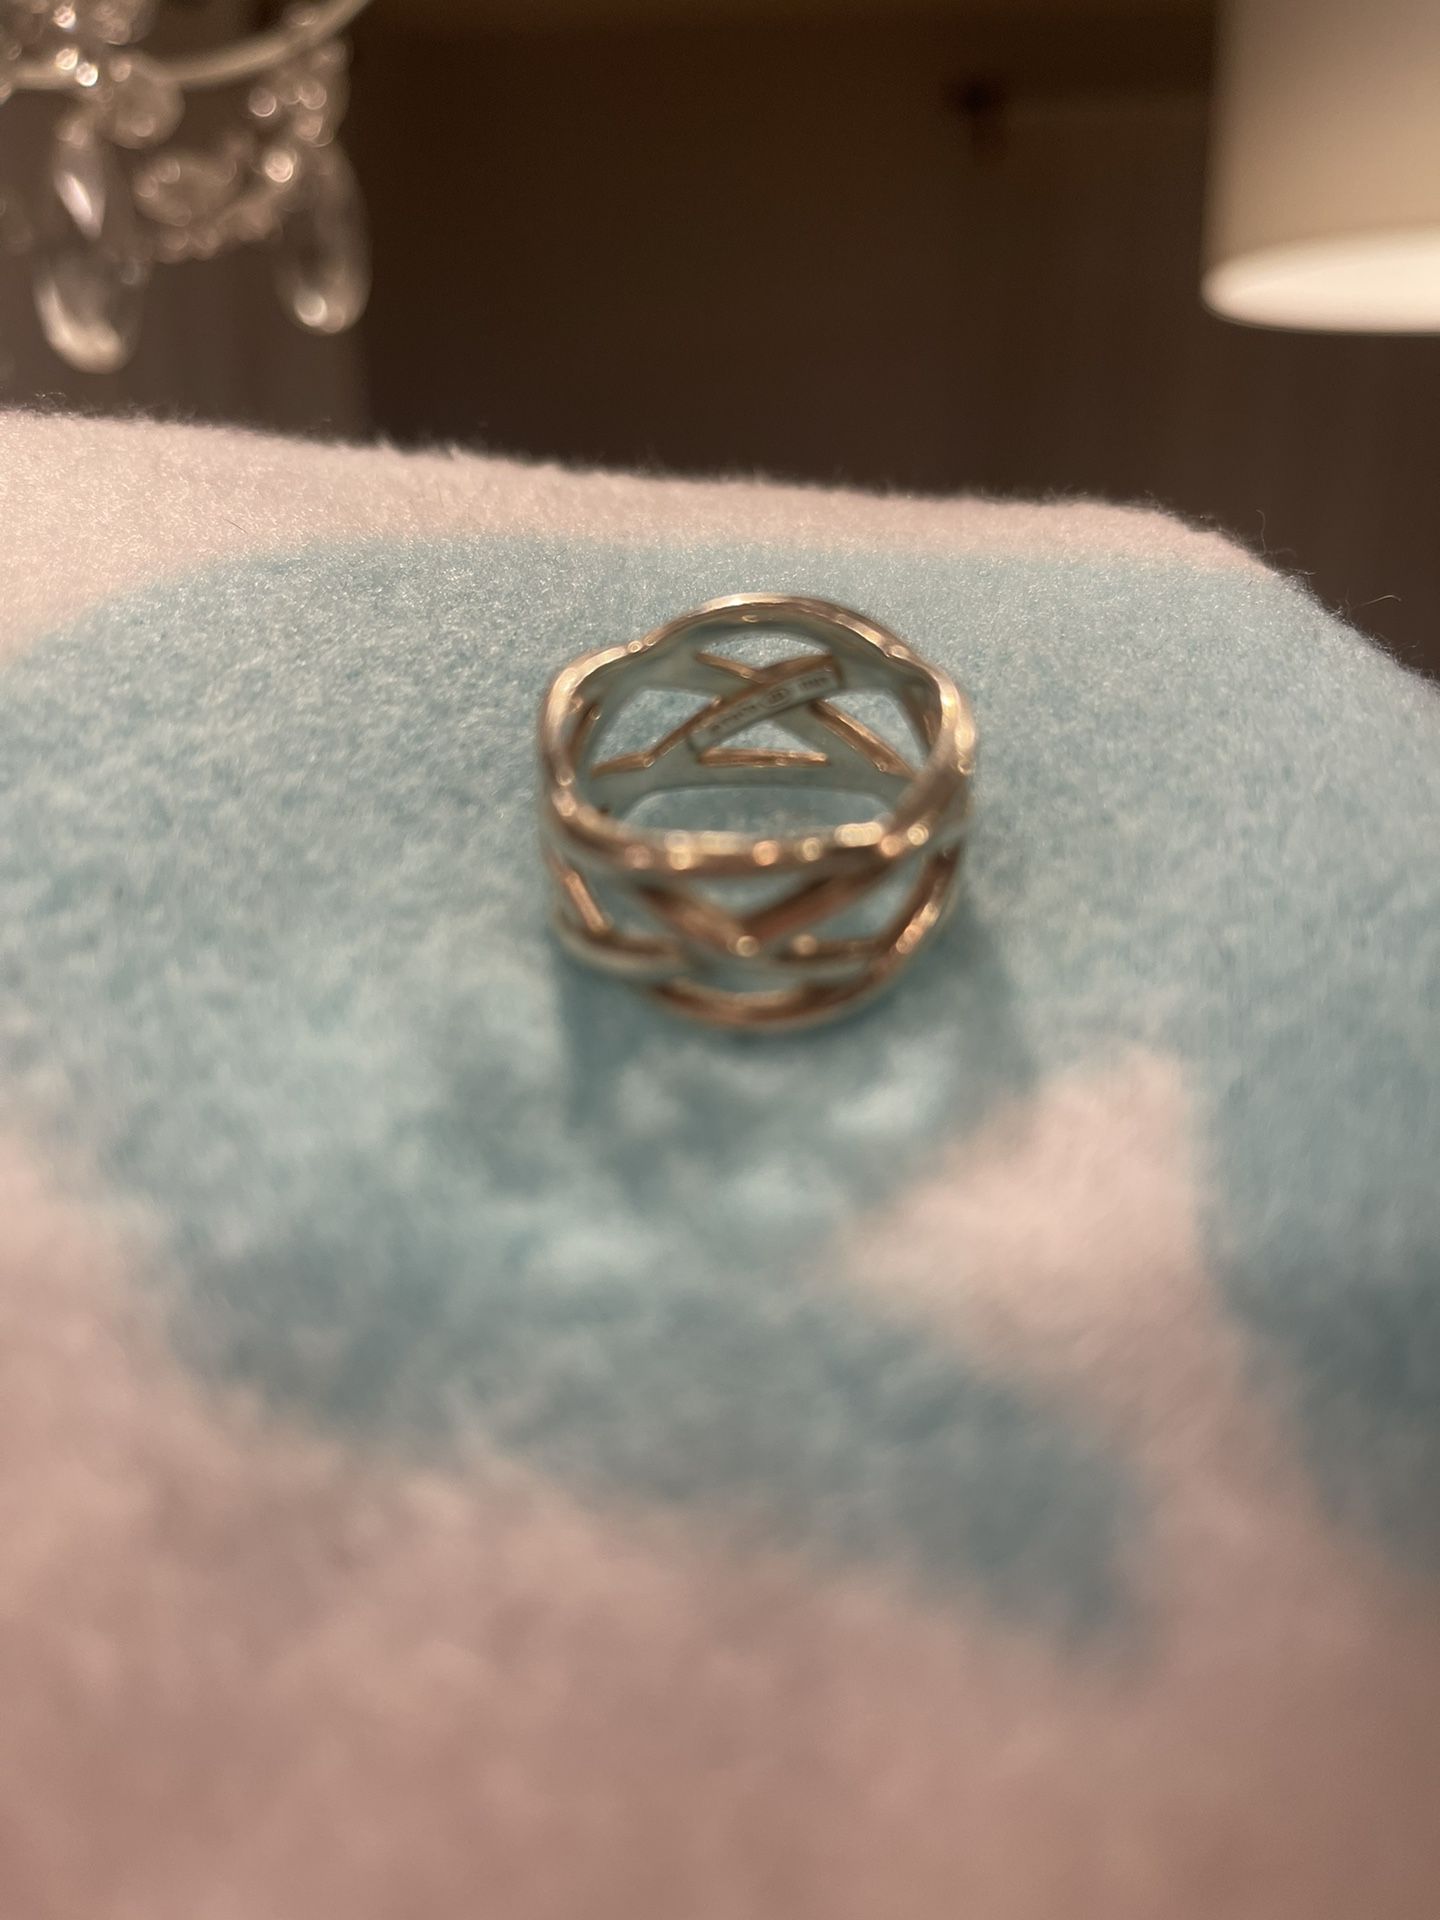 Tiffany Celtic Knot Ring (discontinued)